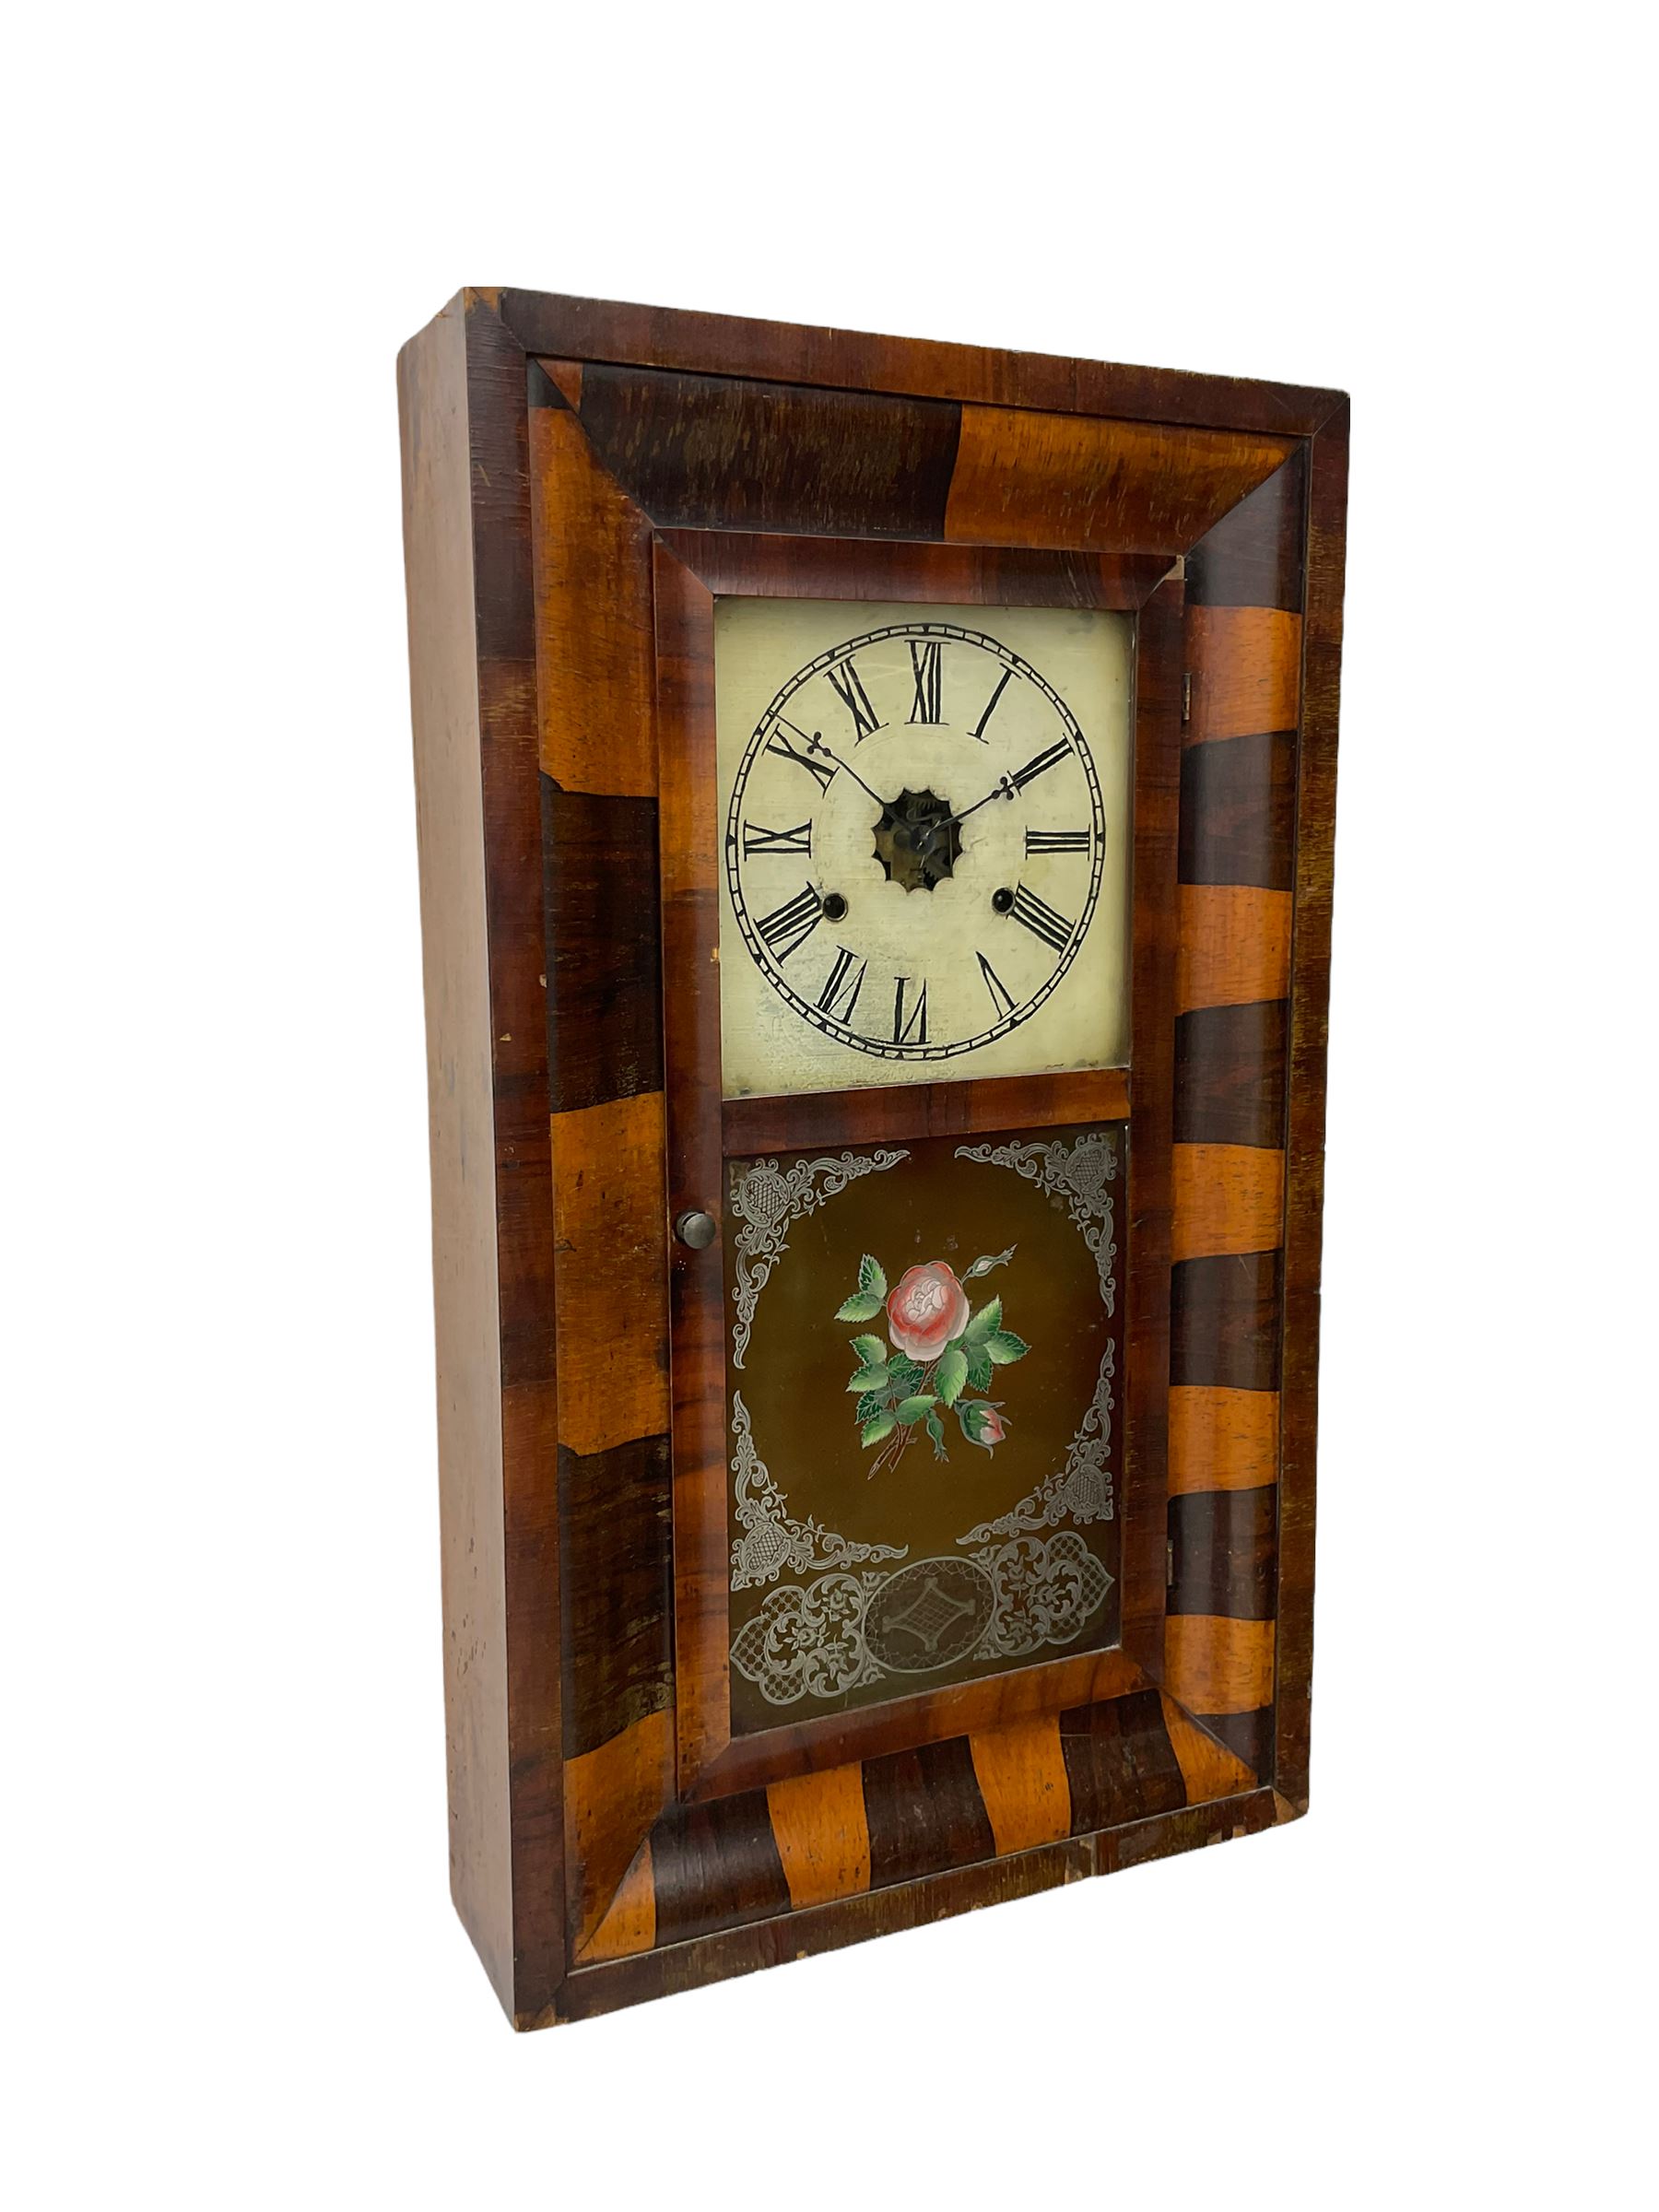 An American Ogee shelf clock in a contrasting mahogany veneered case - Image 2 of 4